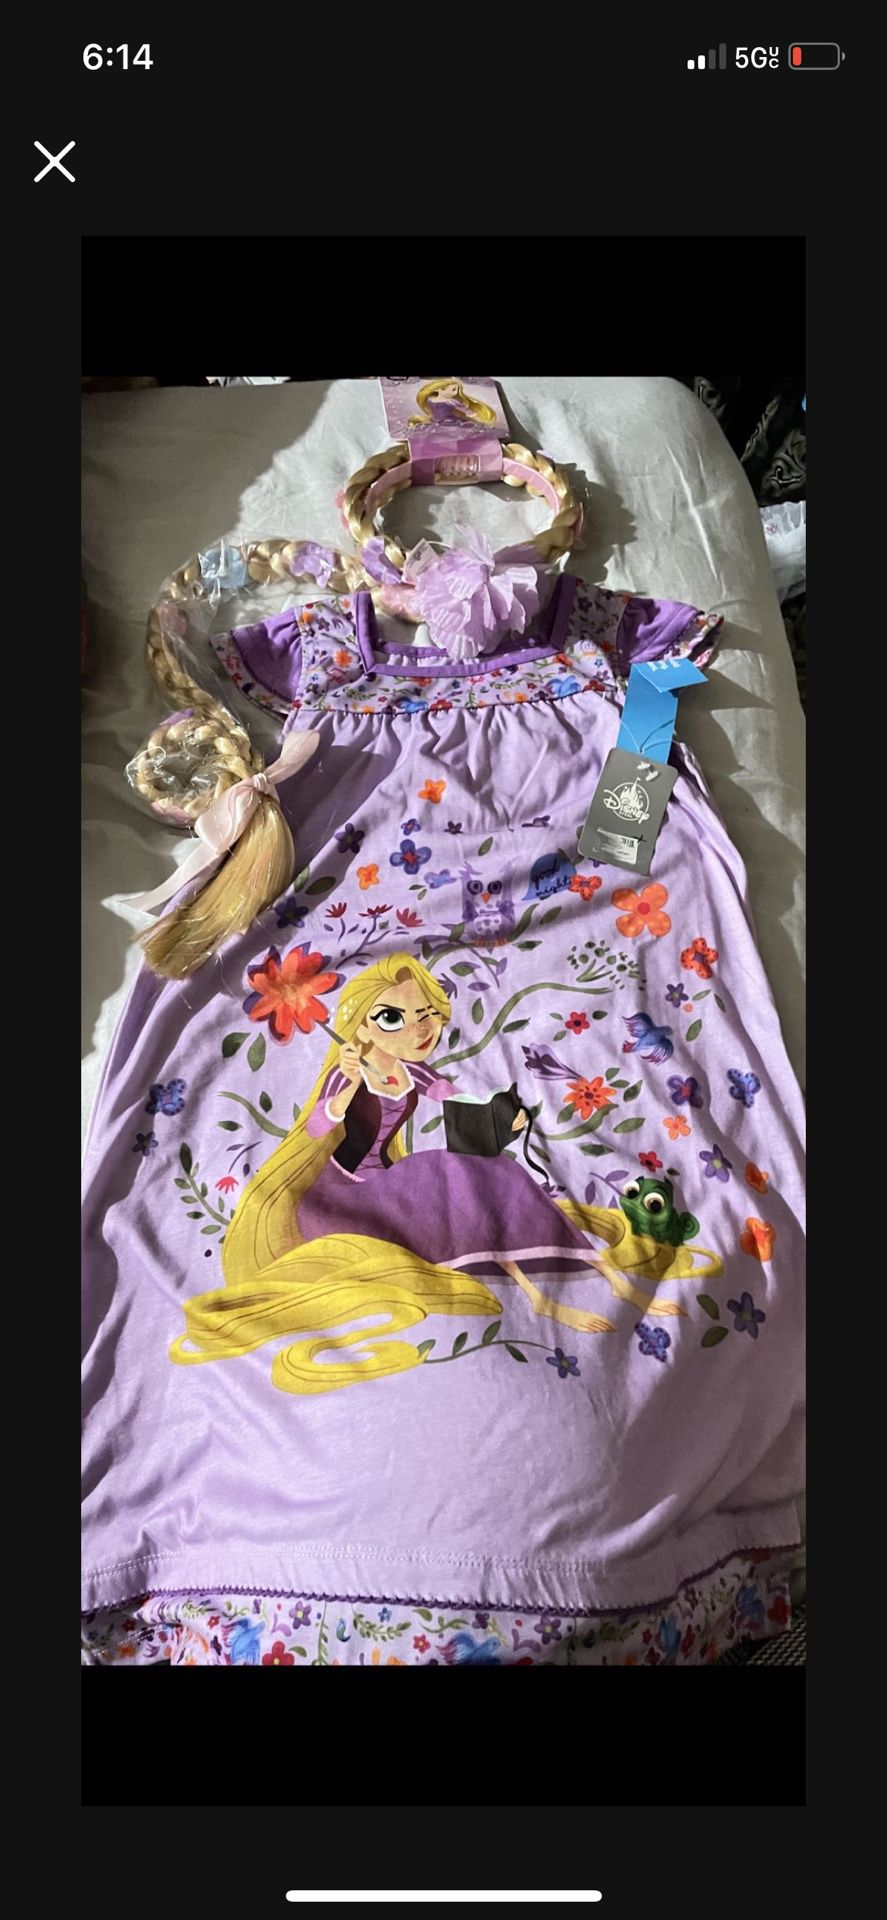 Rapunzel Tangled Costume Braid Wig Long Hair Crown Tiara And Sleeping Gown Size 7/8 NWT Serious inquiries only  Pick up location in the city of Pico R